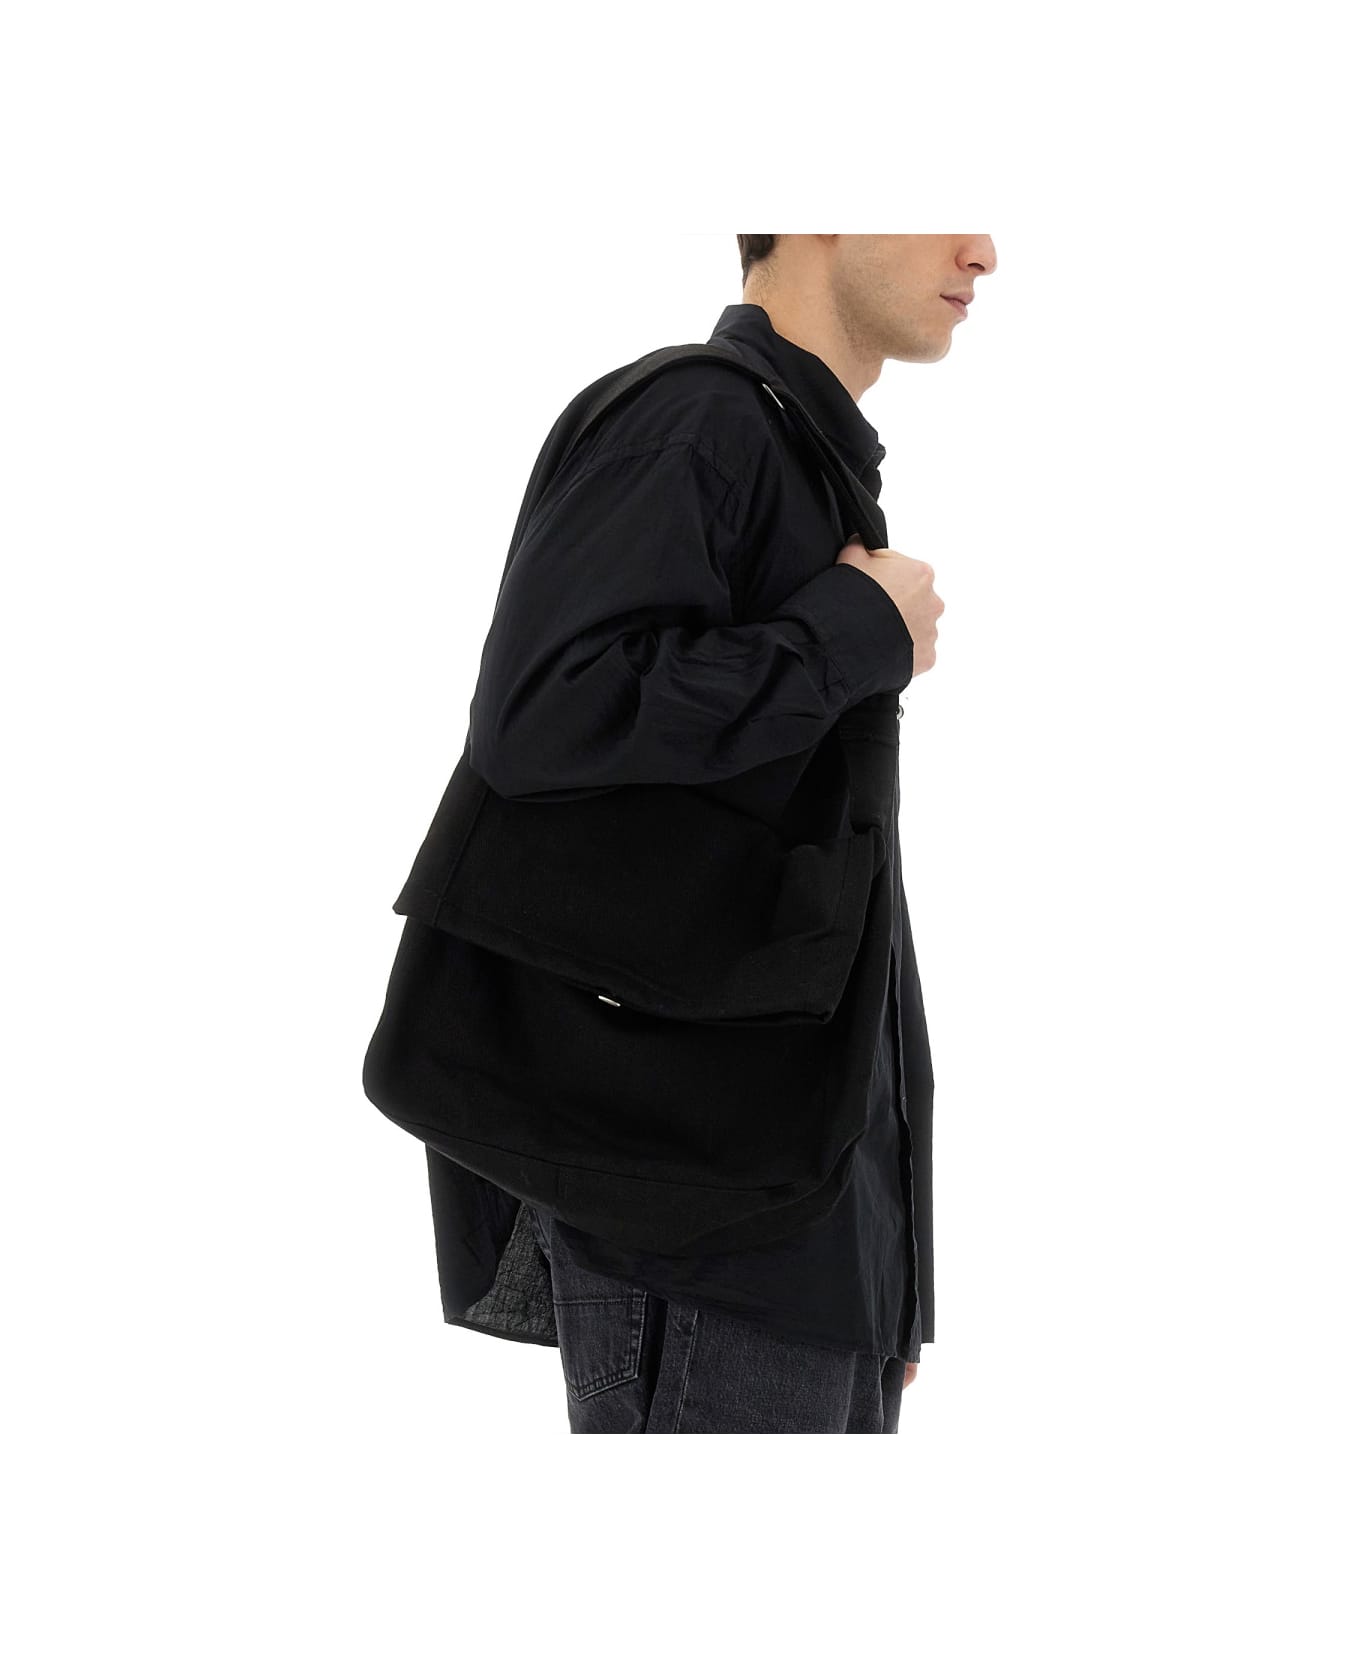 Our Legacy Oversize Fit Shirt - BLACK シャツ